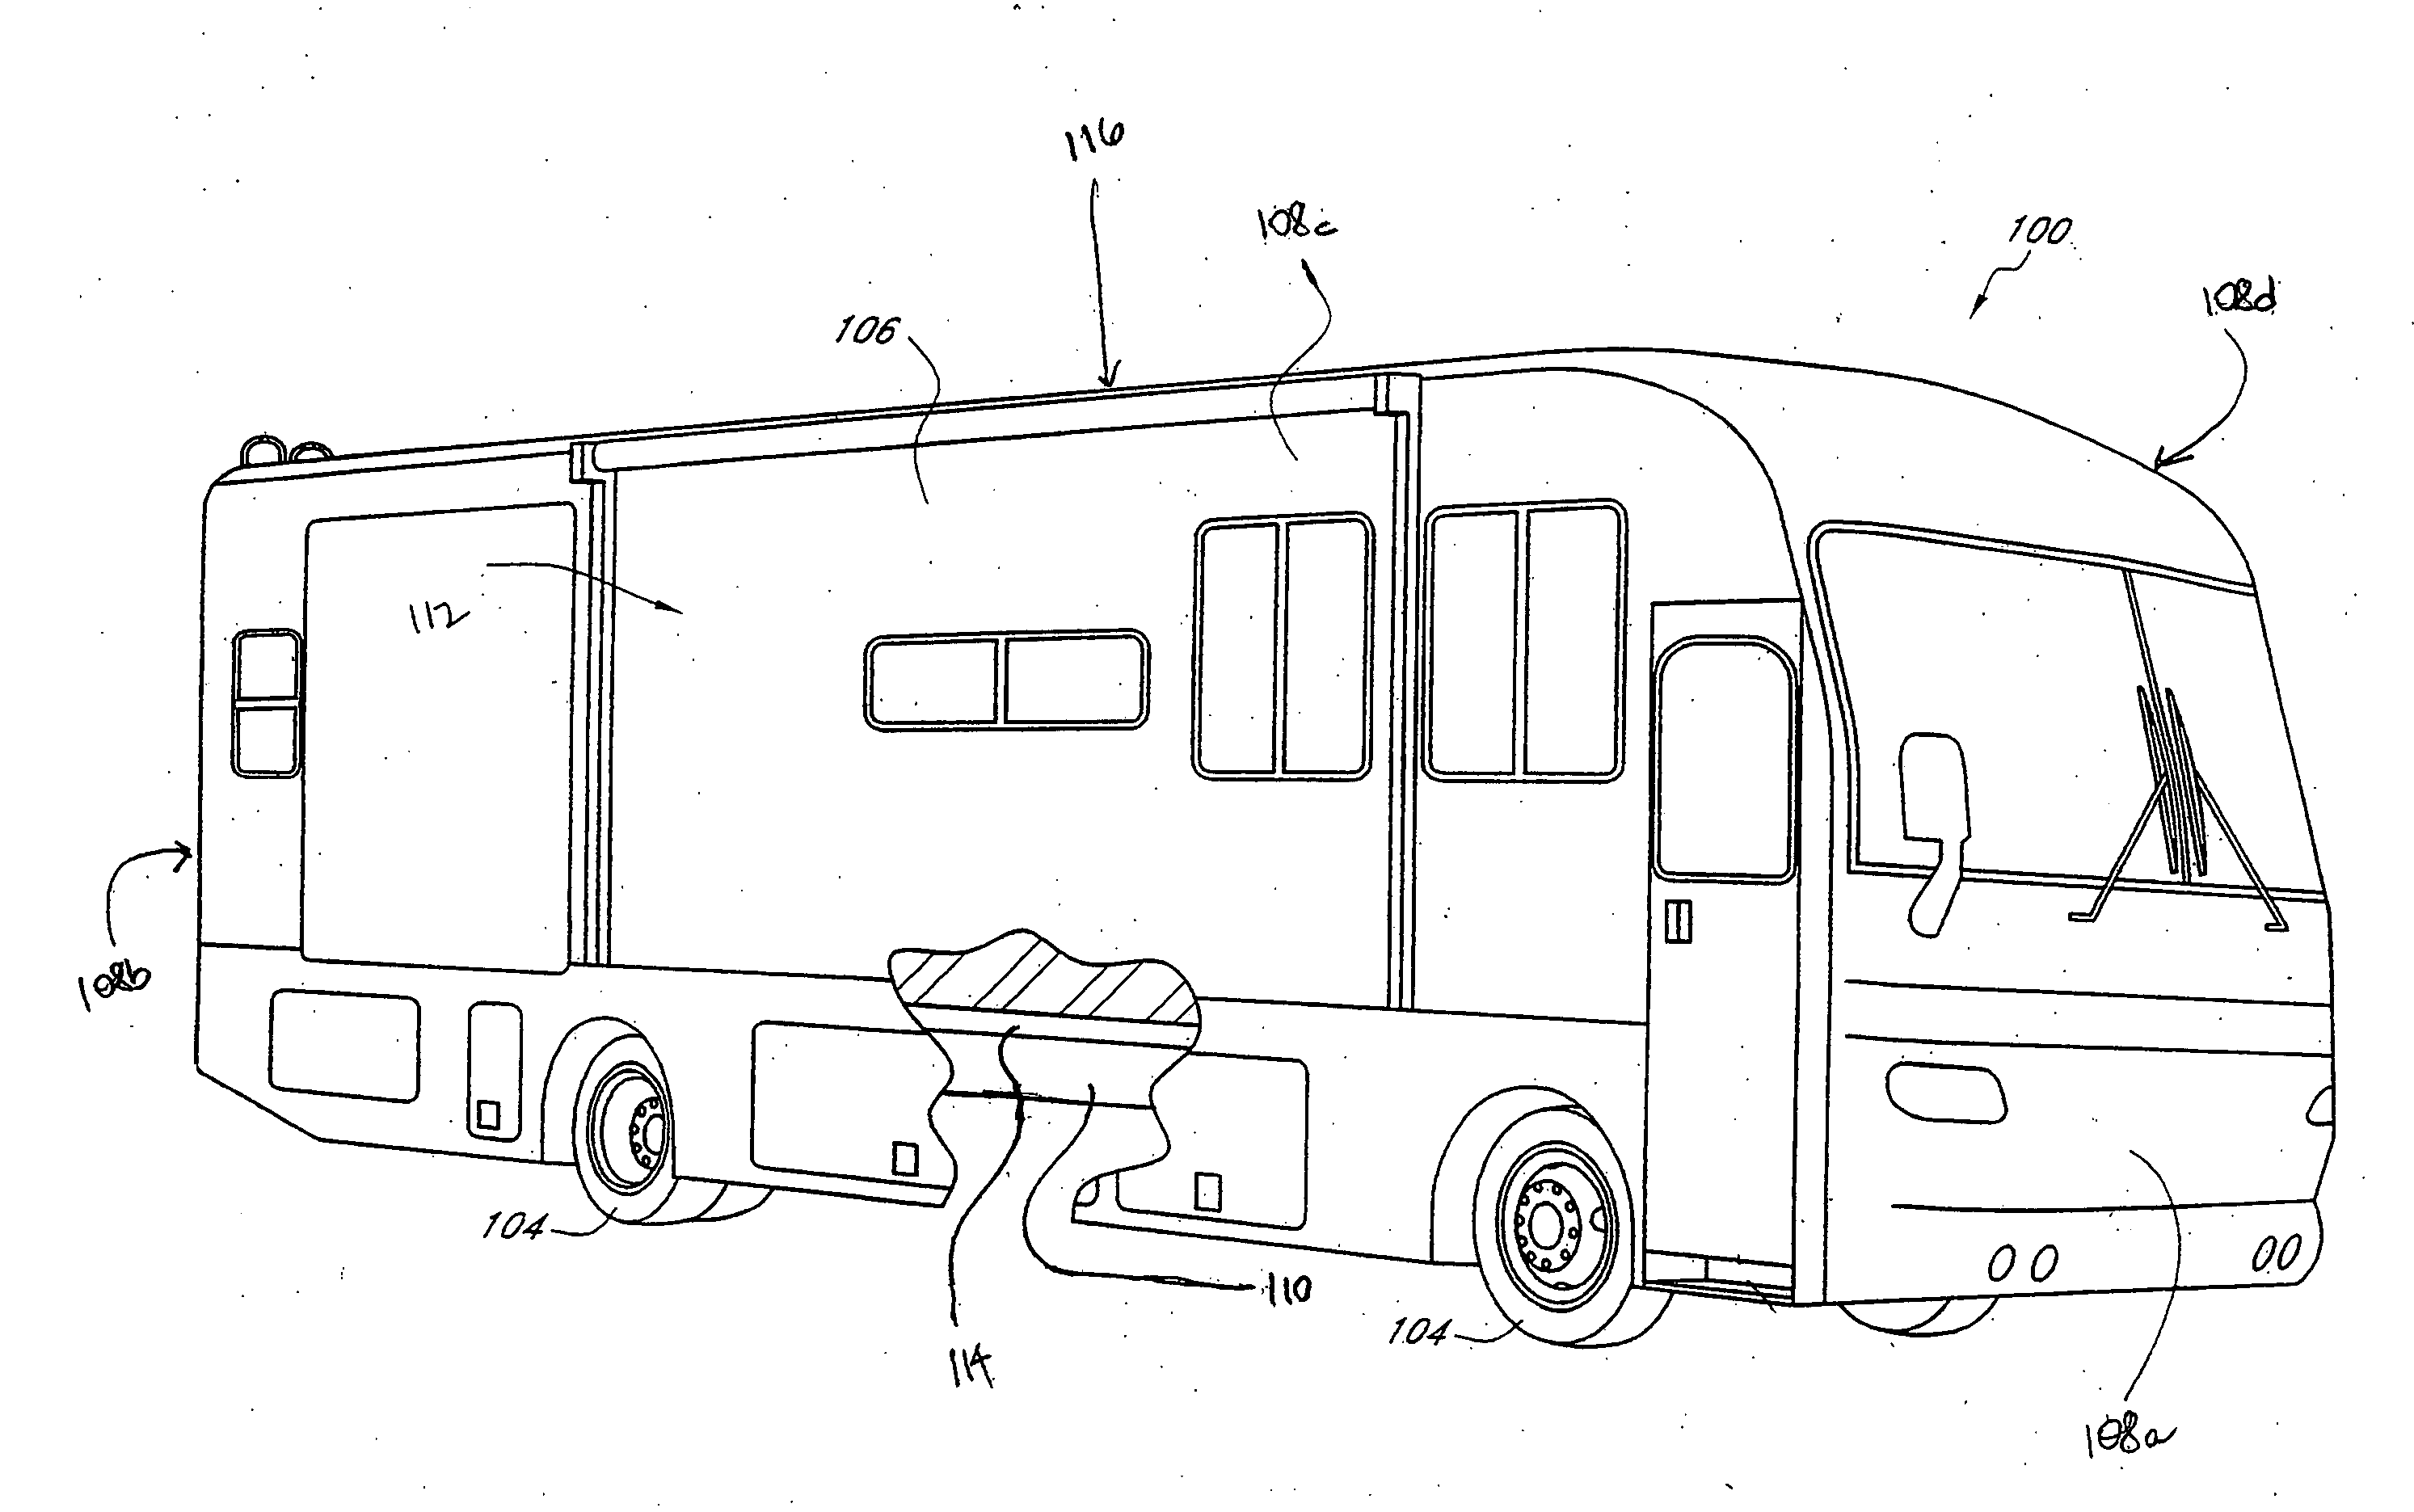 Slide-out mechanism for recreational vehicles